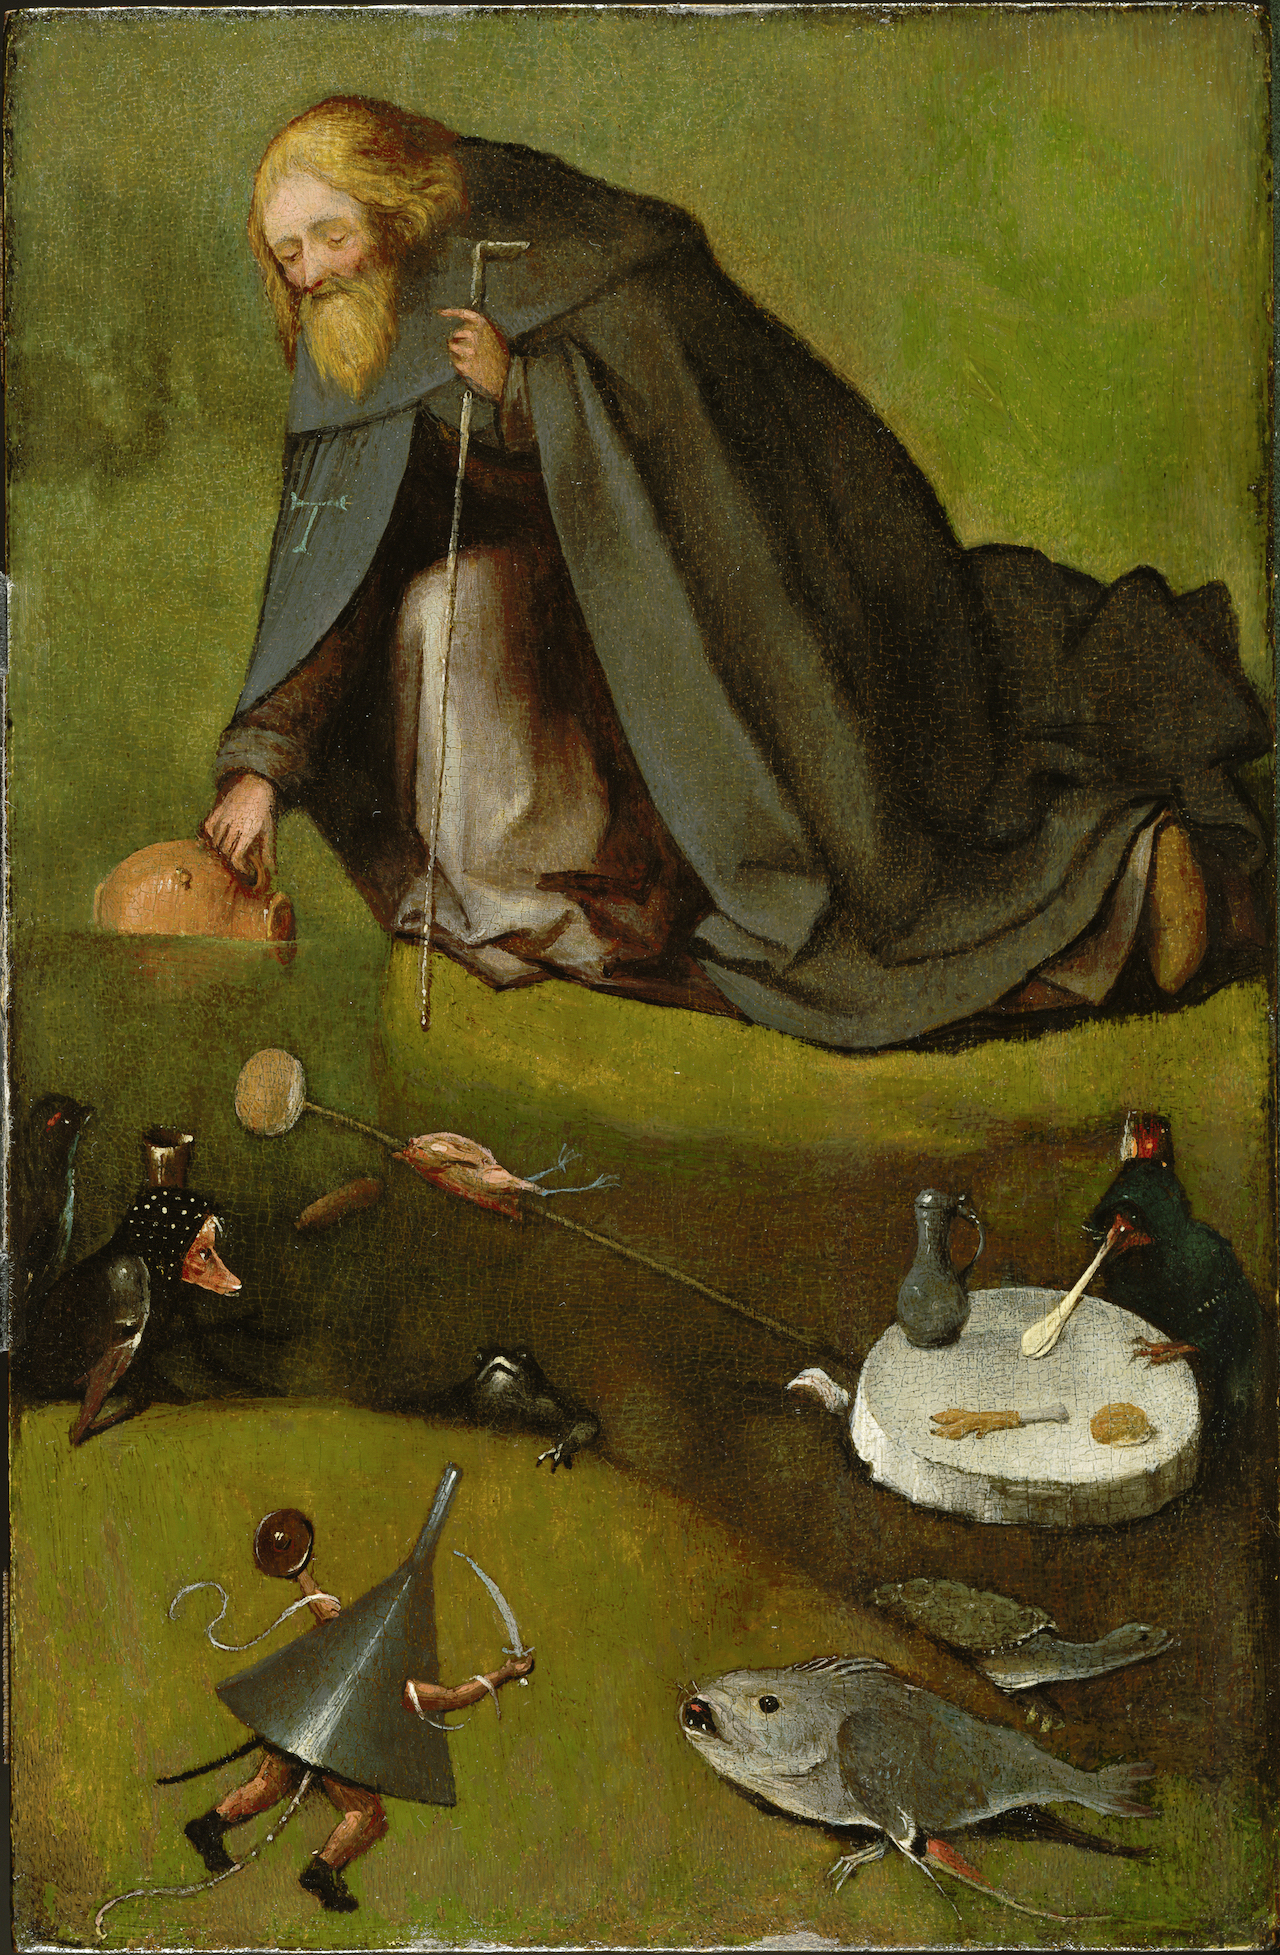 The Temptation of St. Anthony by Hieronymus Bosch - 1500-1510 - 38.58 × 25.4 cm Nelson-Atkins Museum of Art